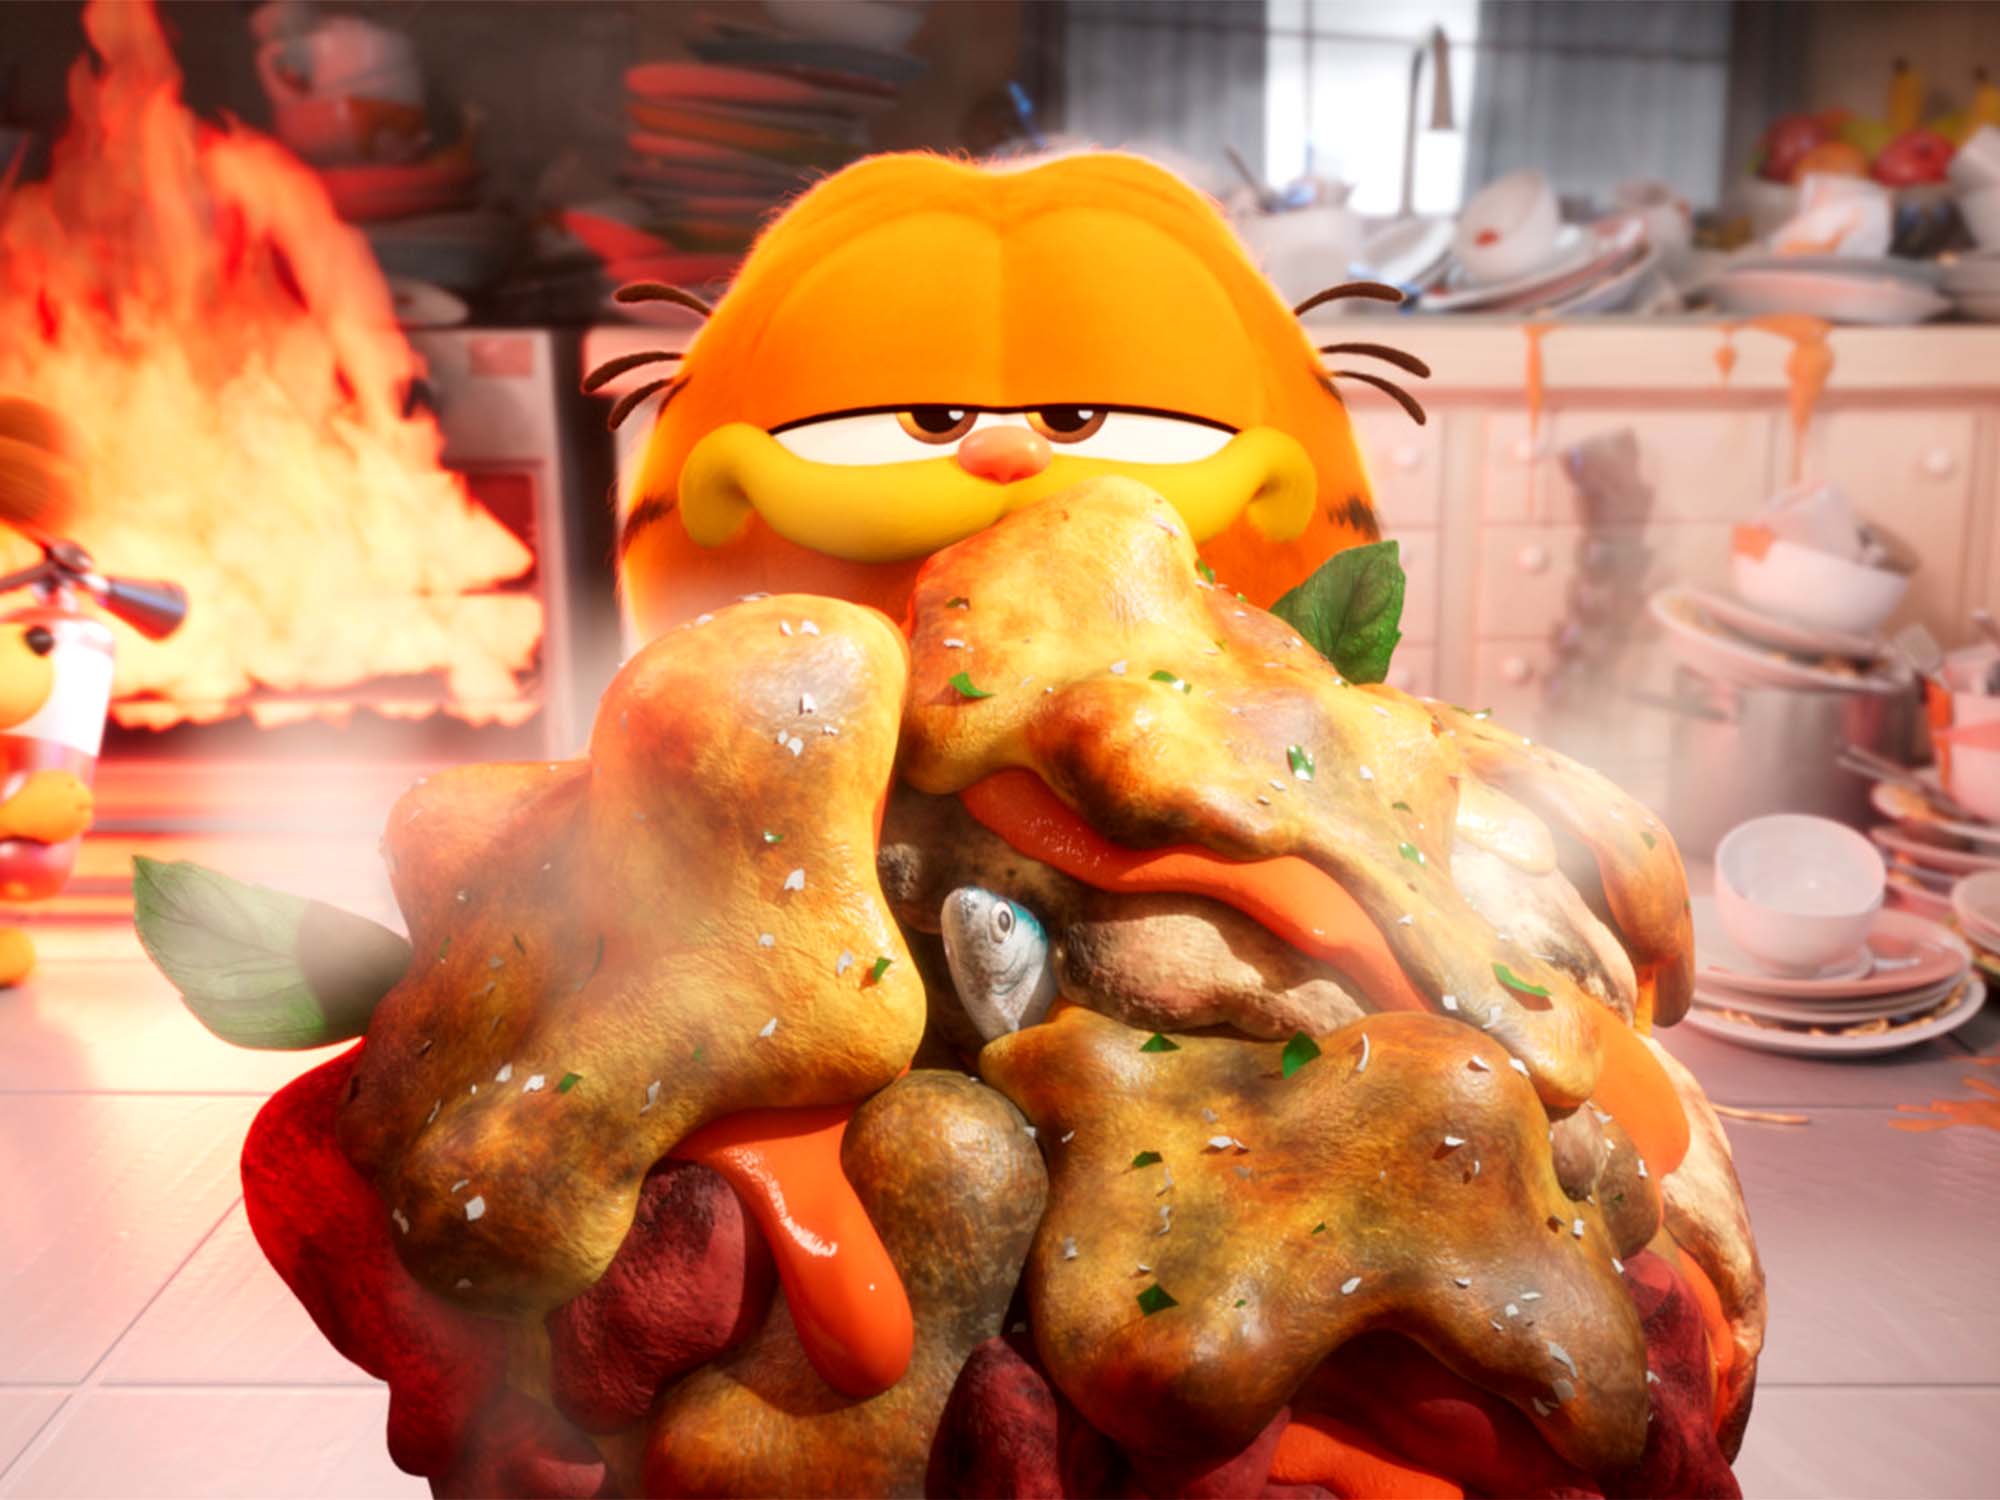 The Garfield Movie review – as messy as a child eating spaghetti